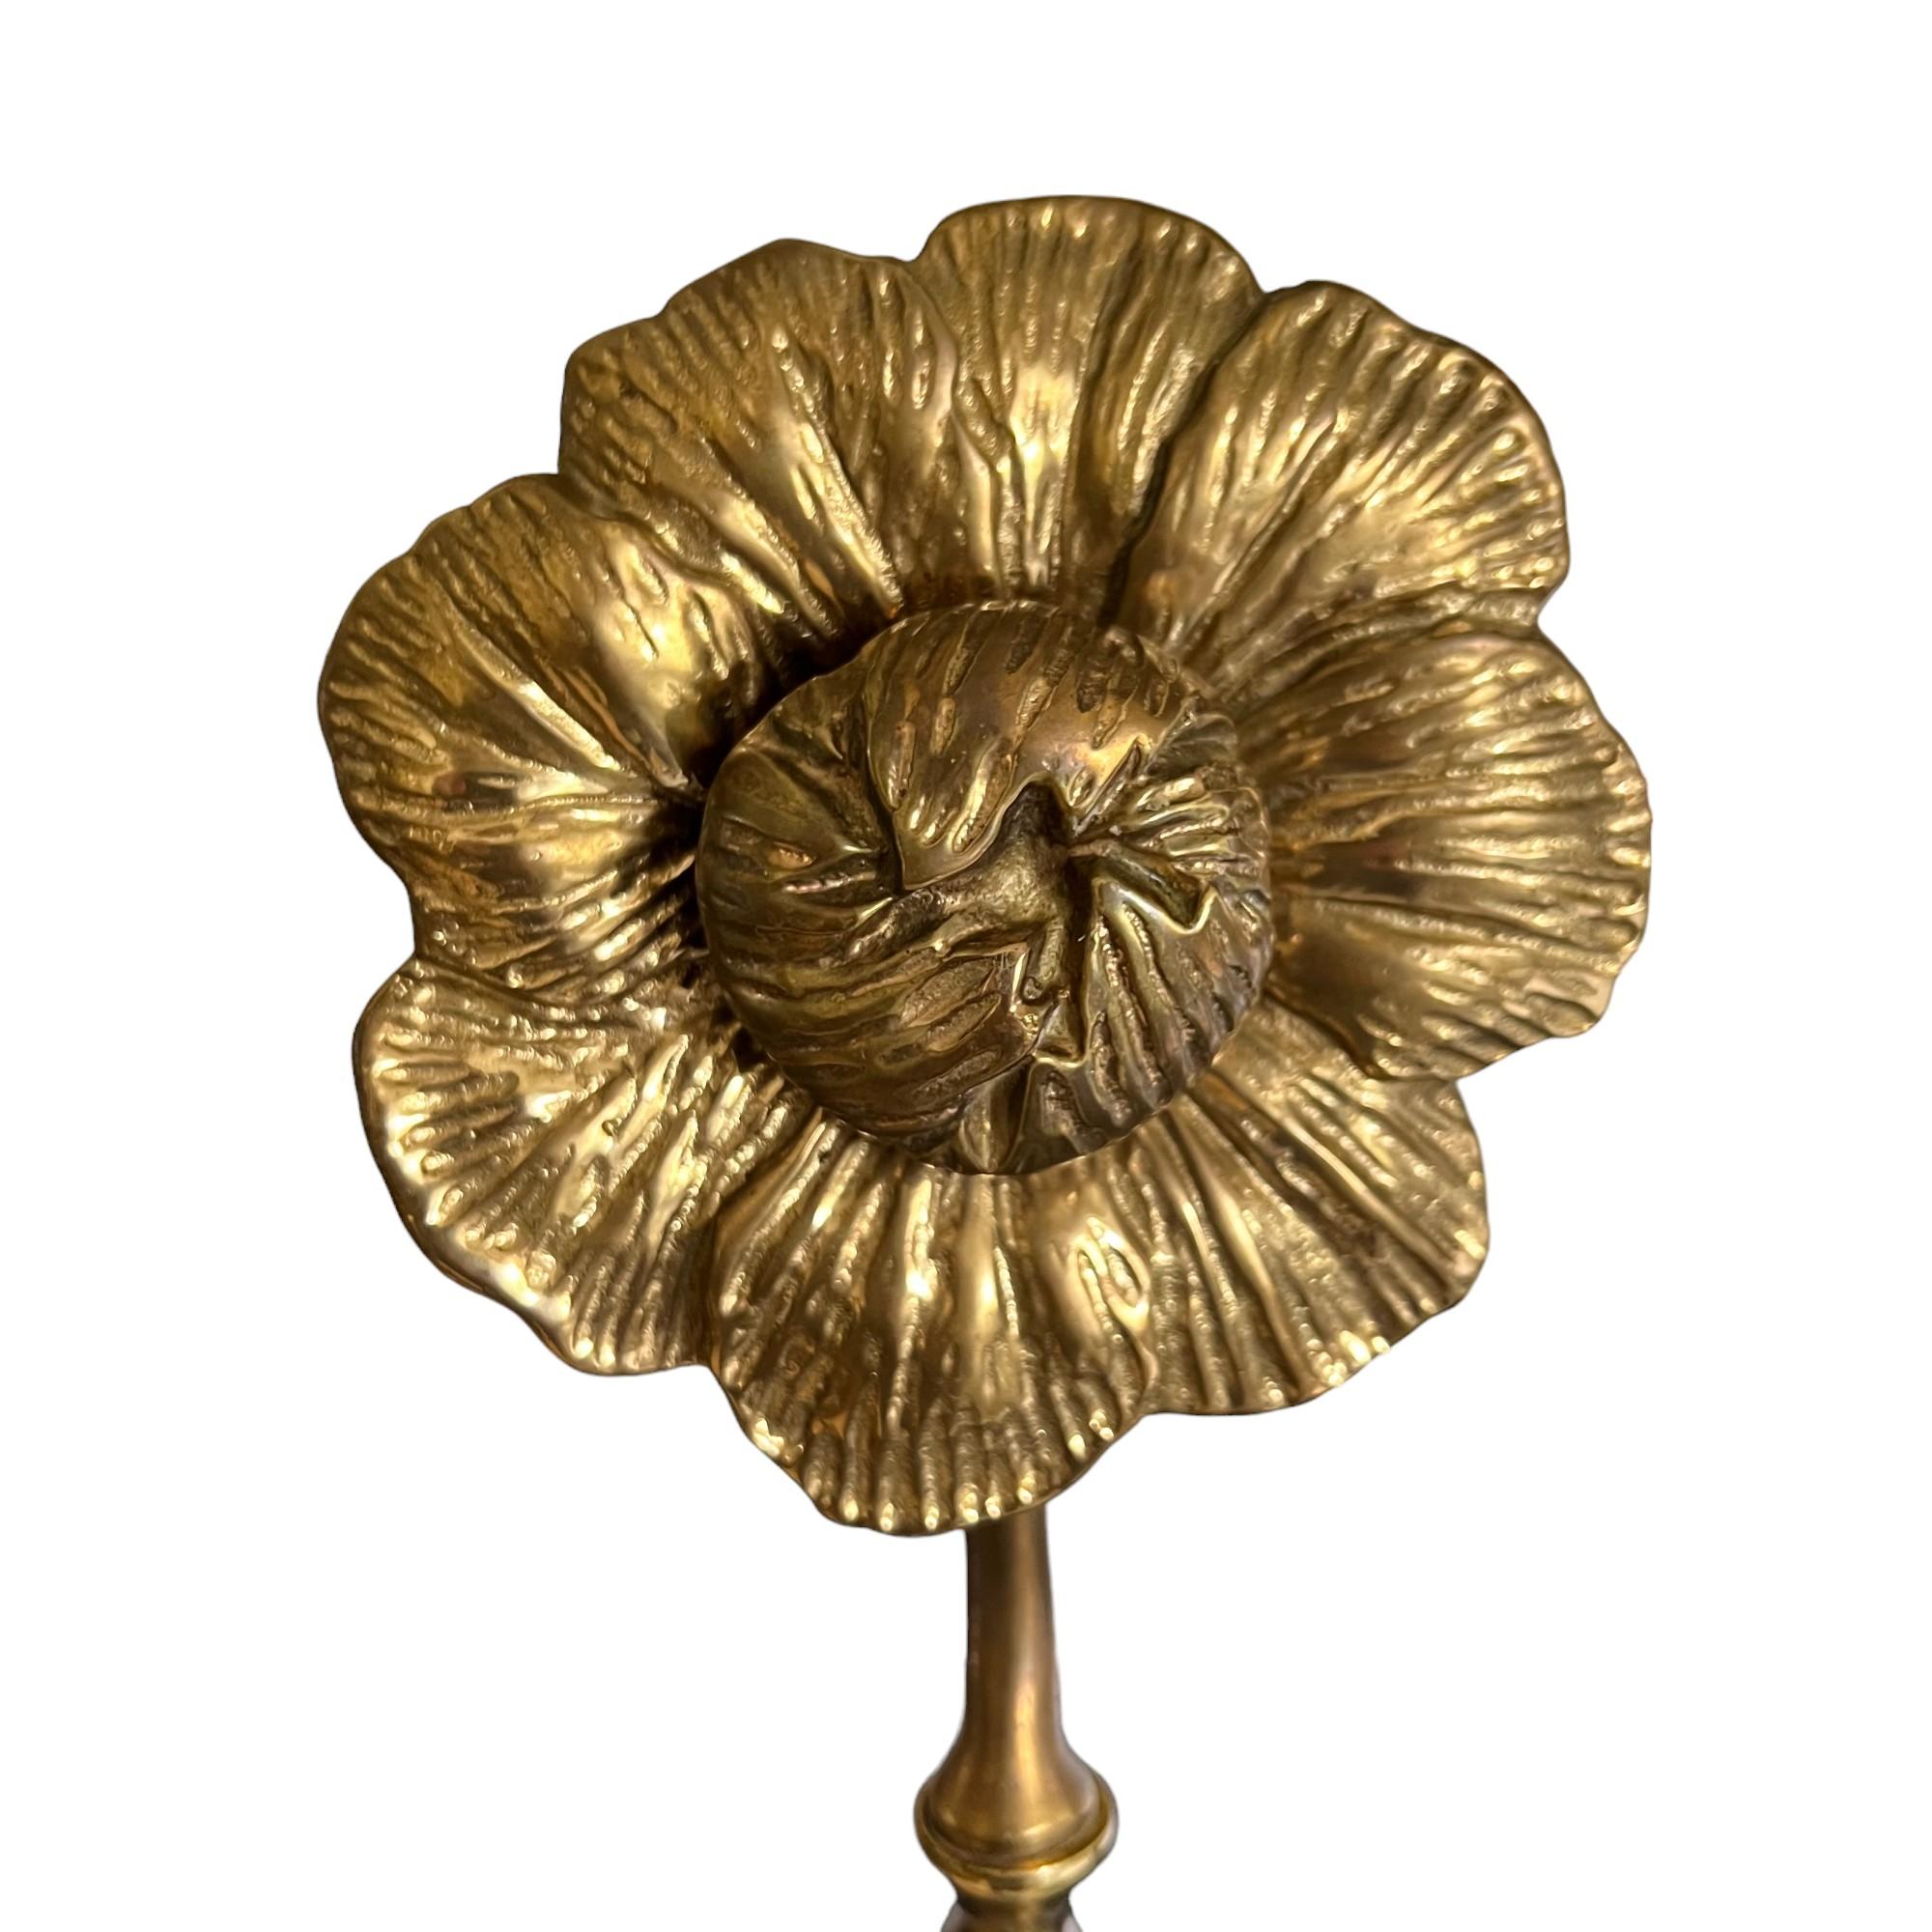 Cast Mid 20th Century Brass Flower Andirons or Chenets, a Pair